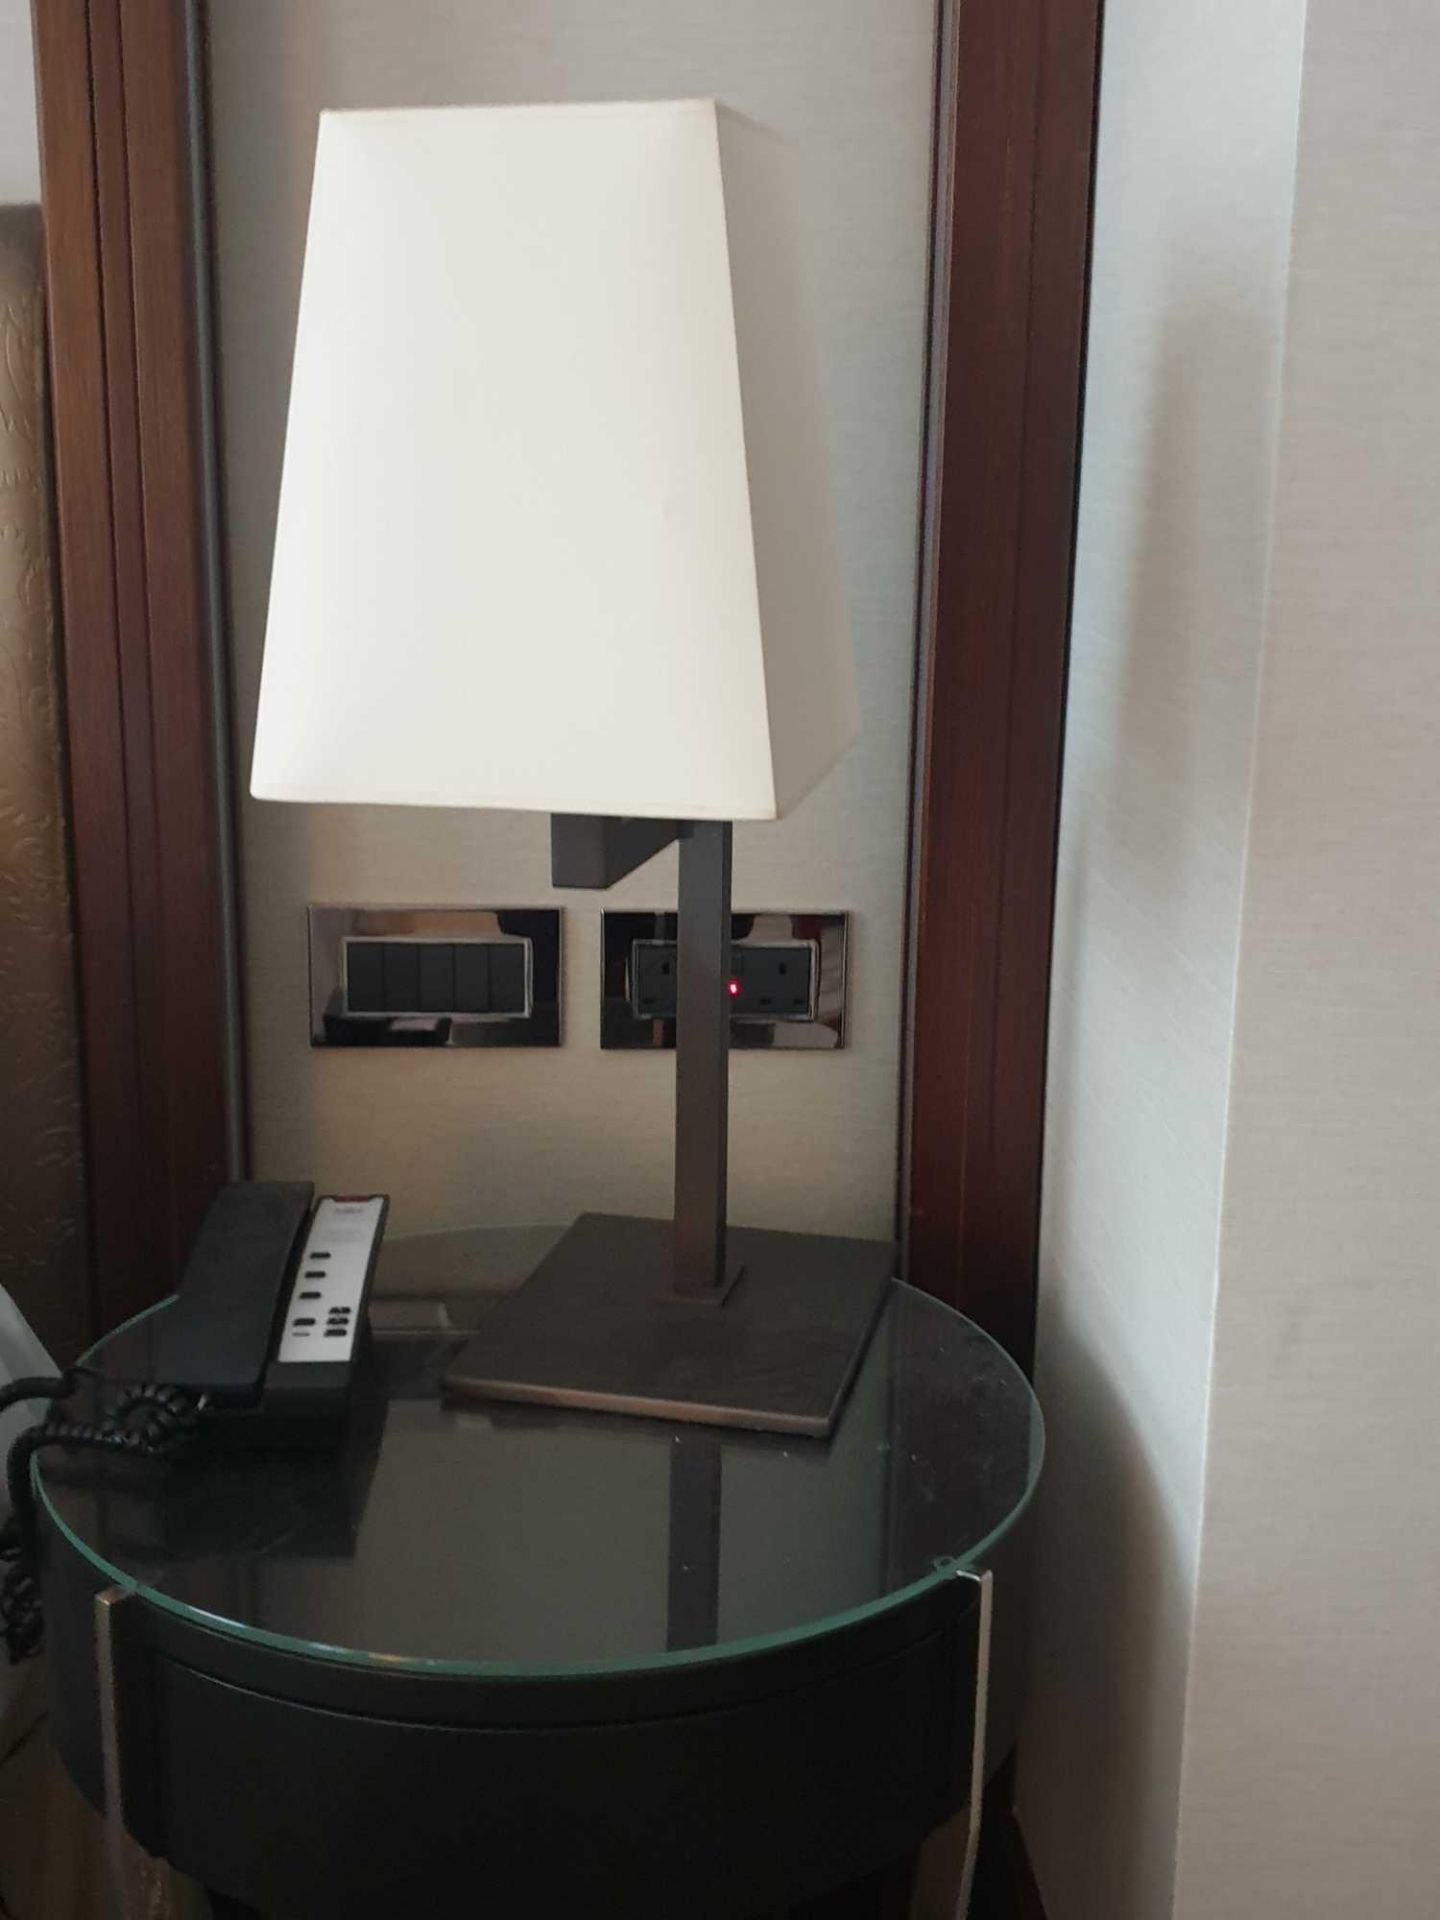 A Pair Of Sifra LMS400/ENG Table Lamp Metal Patinated With Beige Shade And Metal Base 60cm (Loc - Image 2 of 3